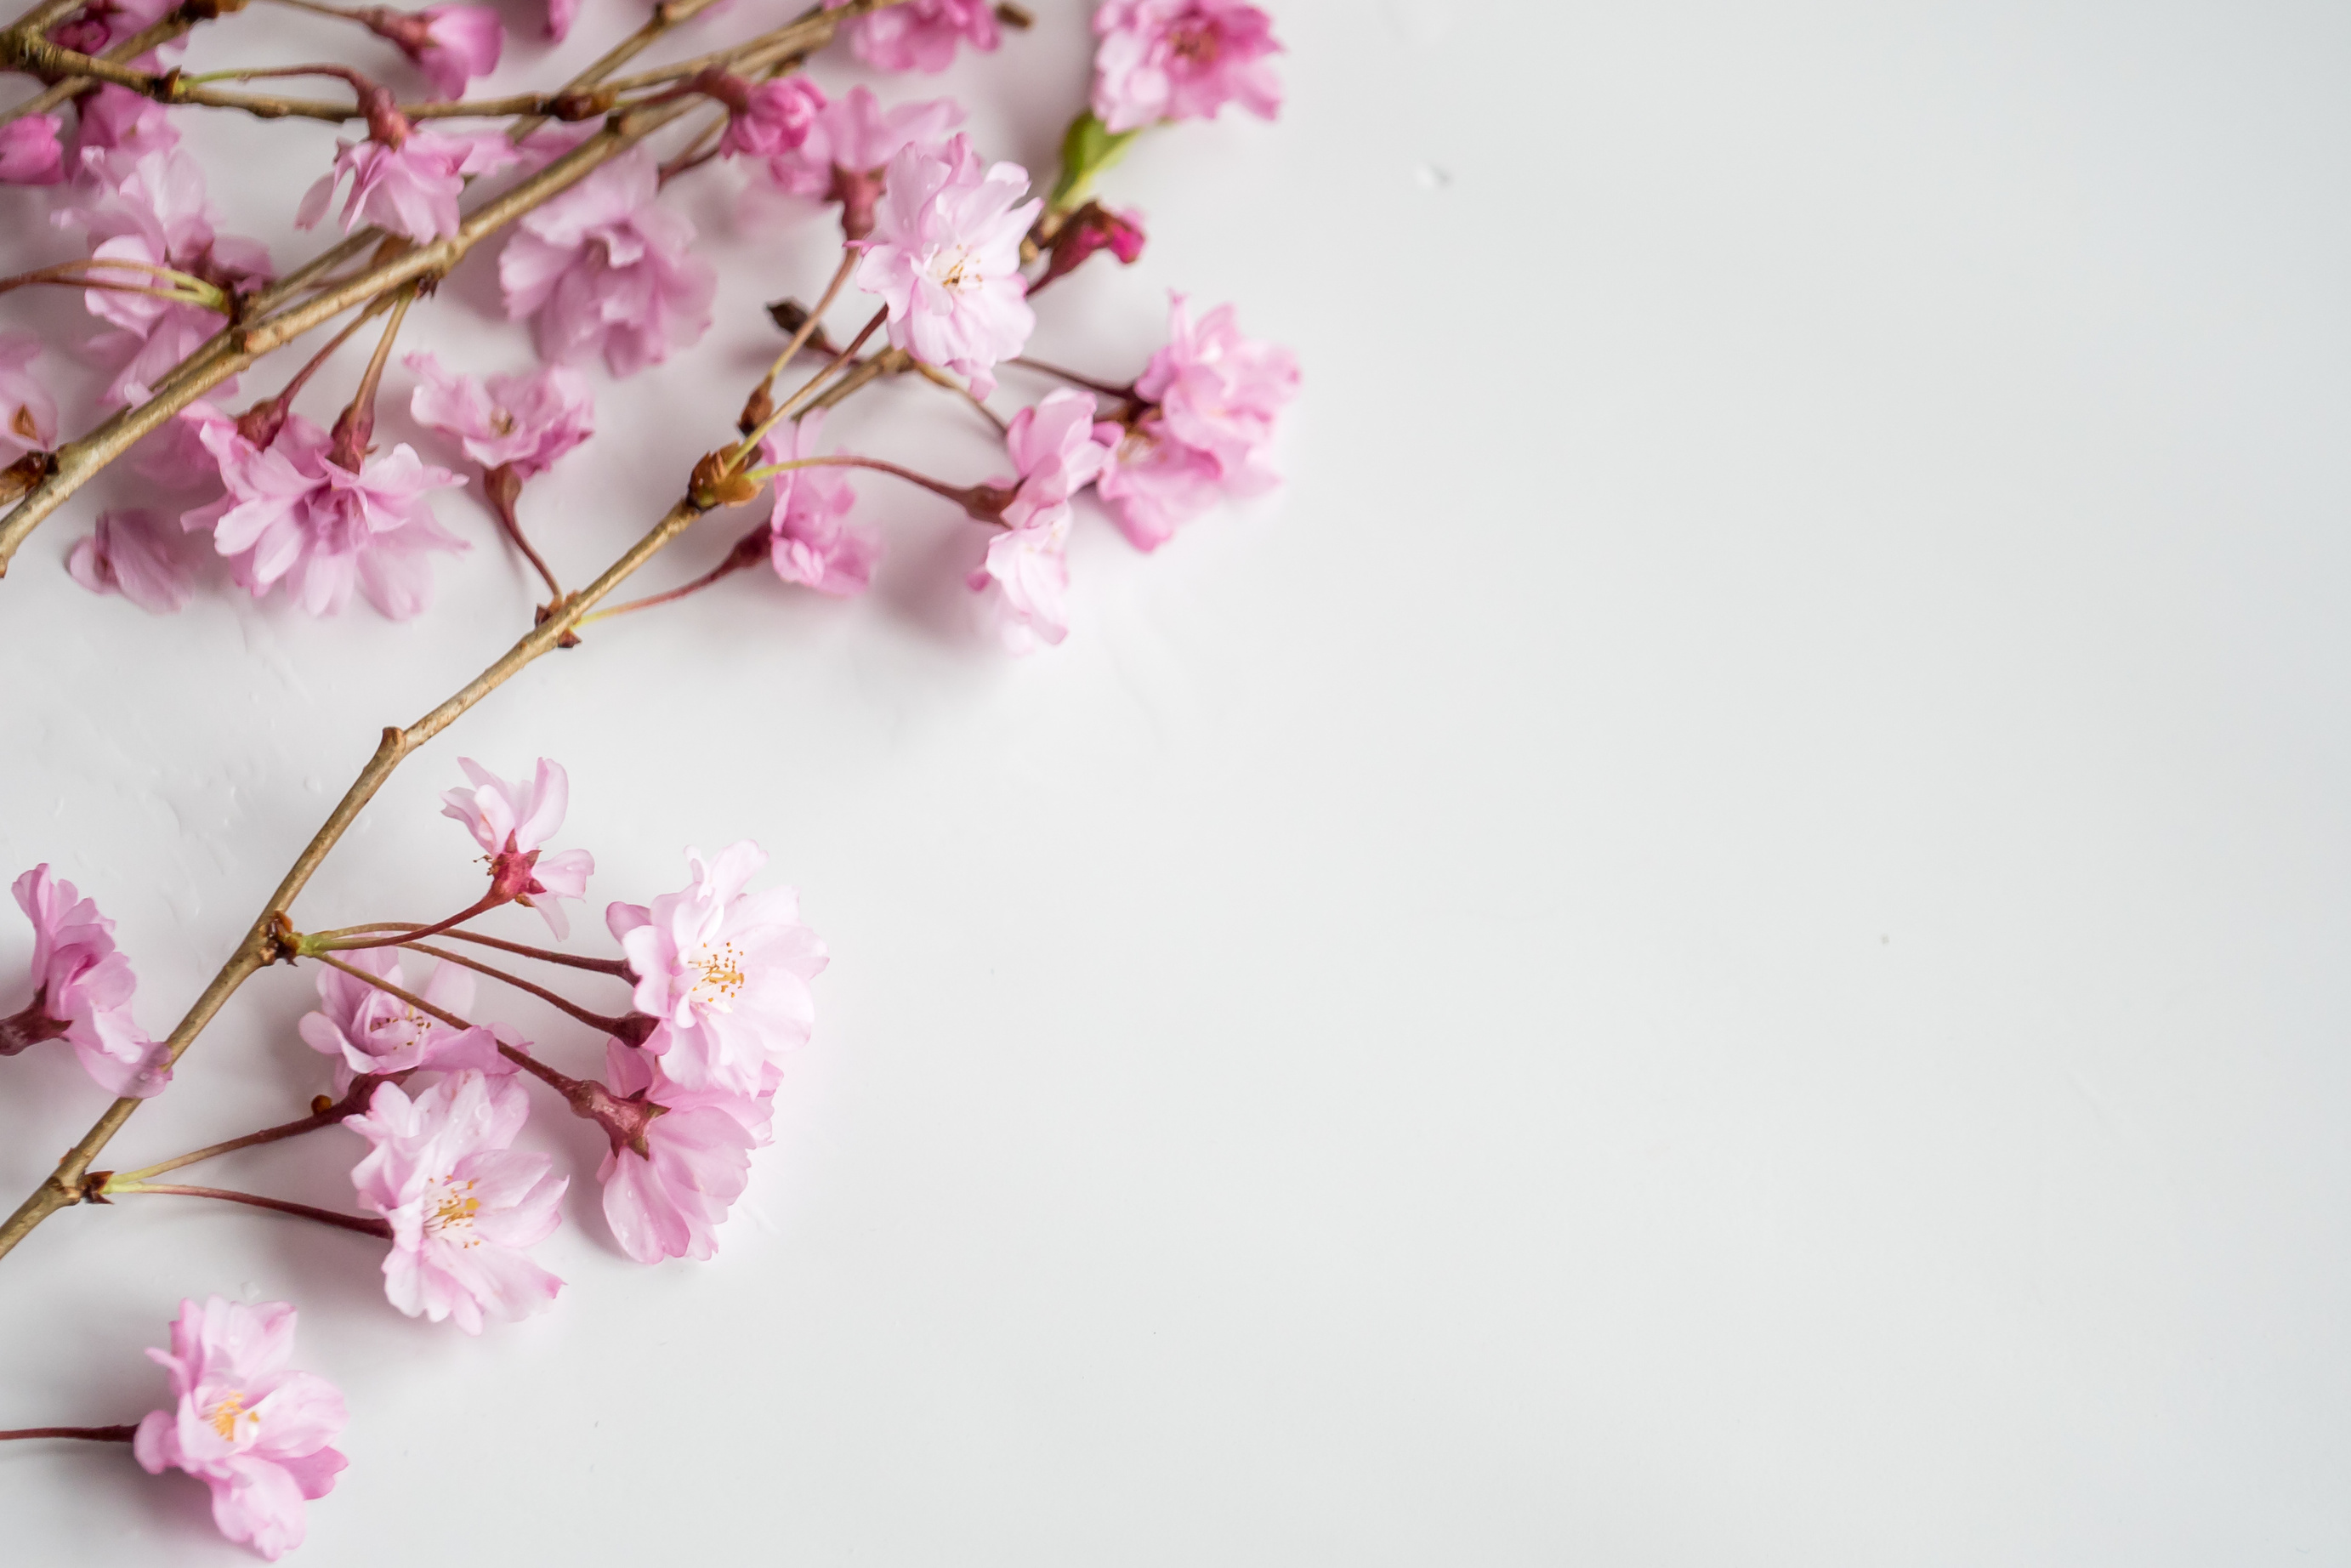 Bunch of tender pink cherry flowers on white background